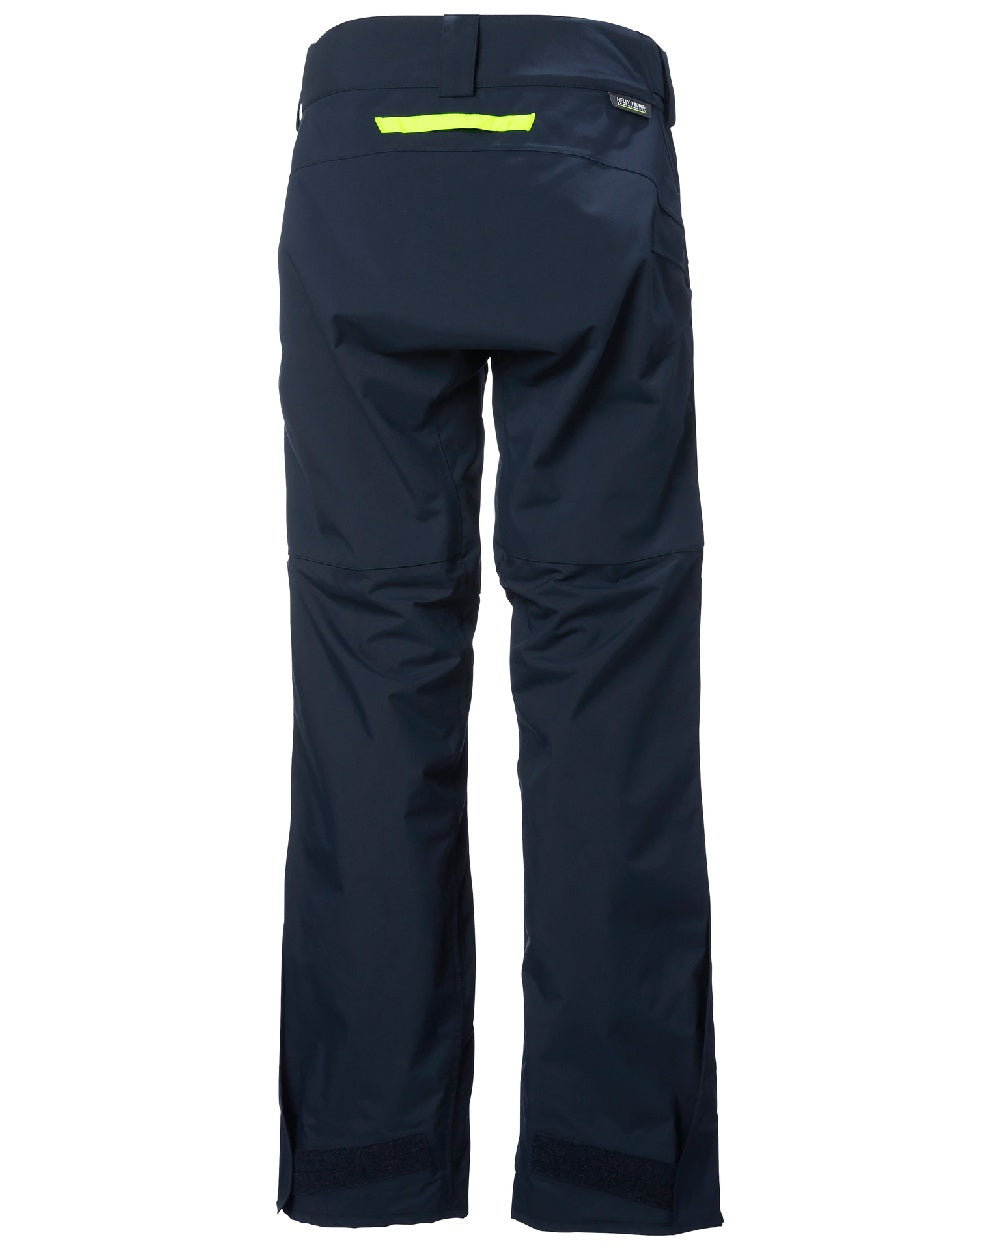 Navy coloured Helly Hansen Womens HP Foil Pants on white background 